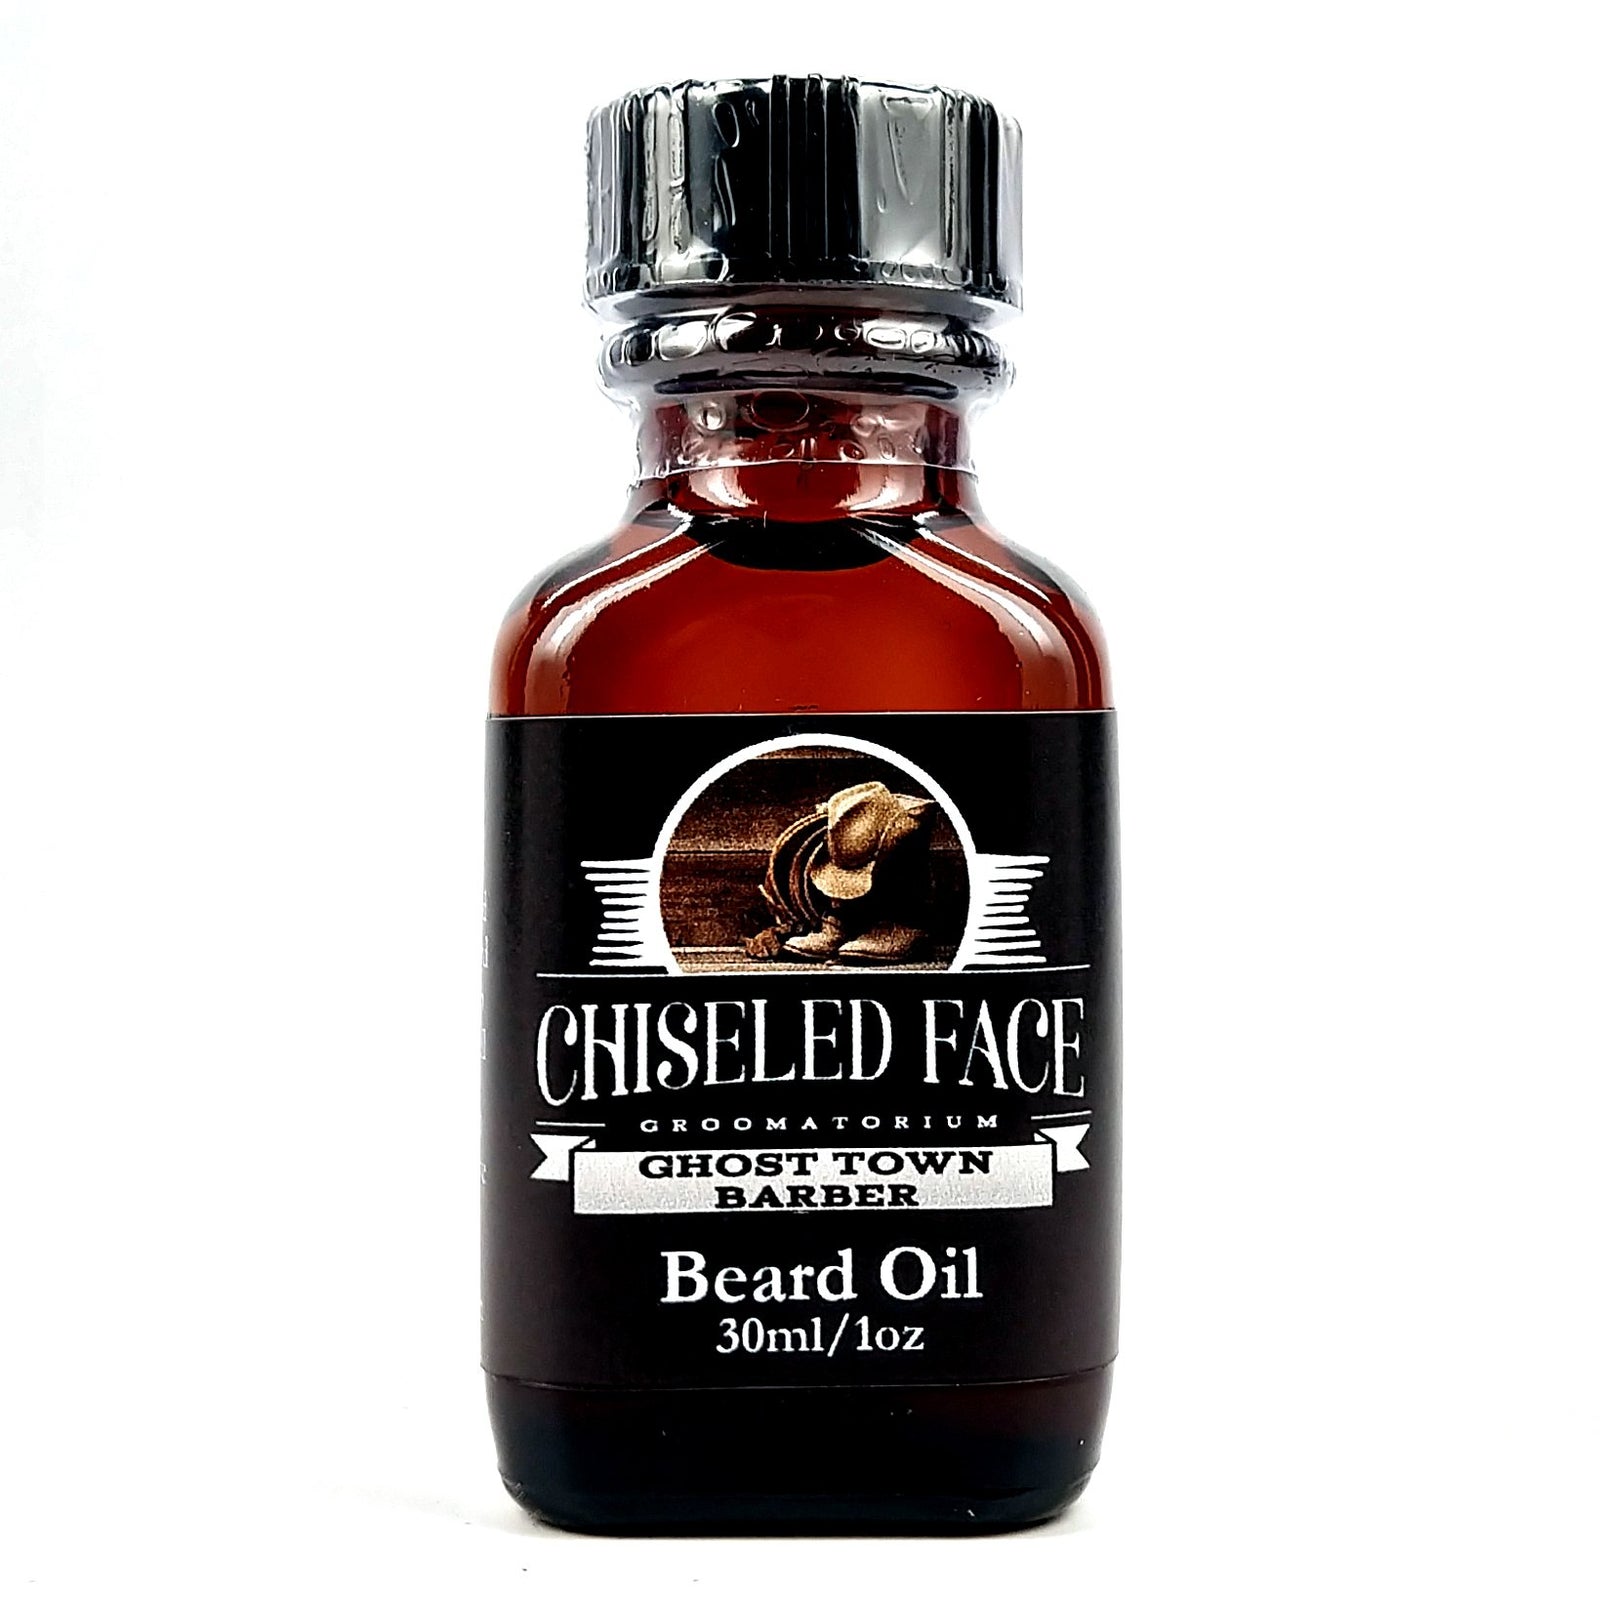 Chiseled face - Ghost Town Barber Beard Oil, 1oz